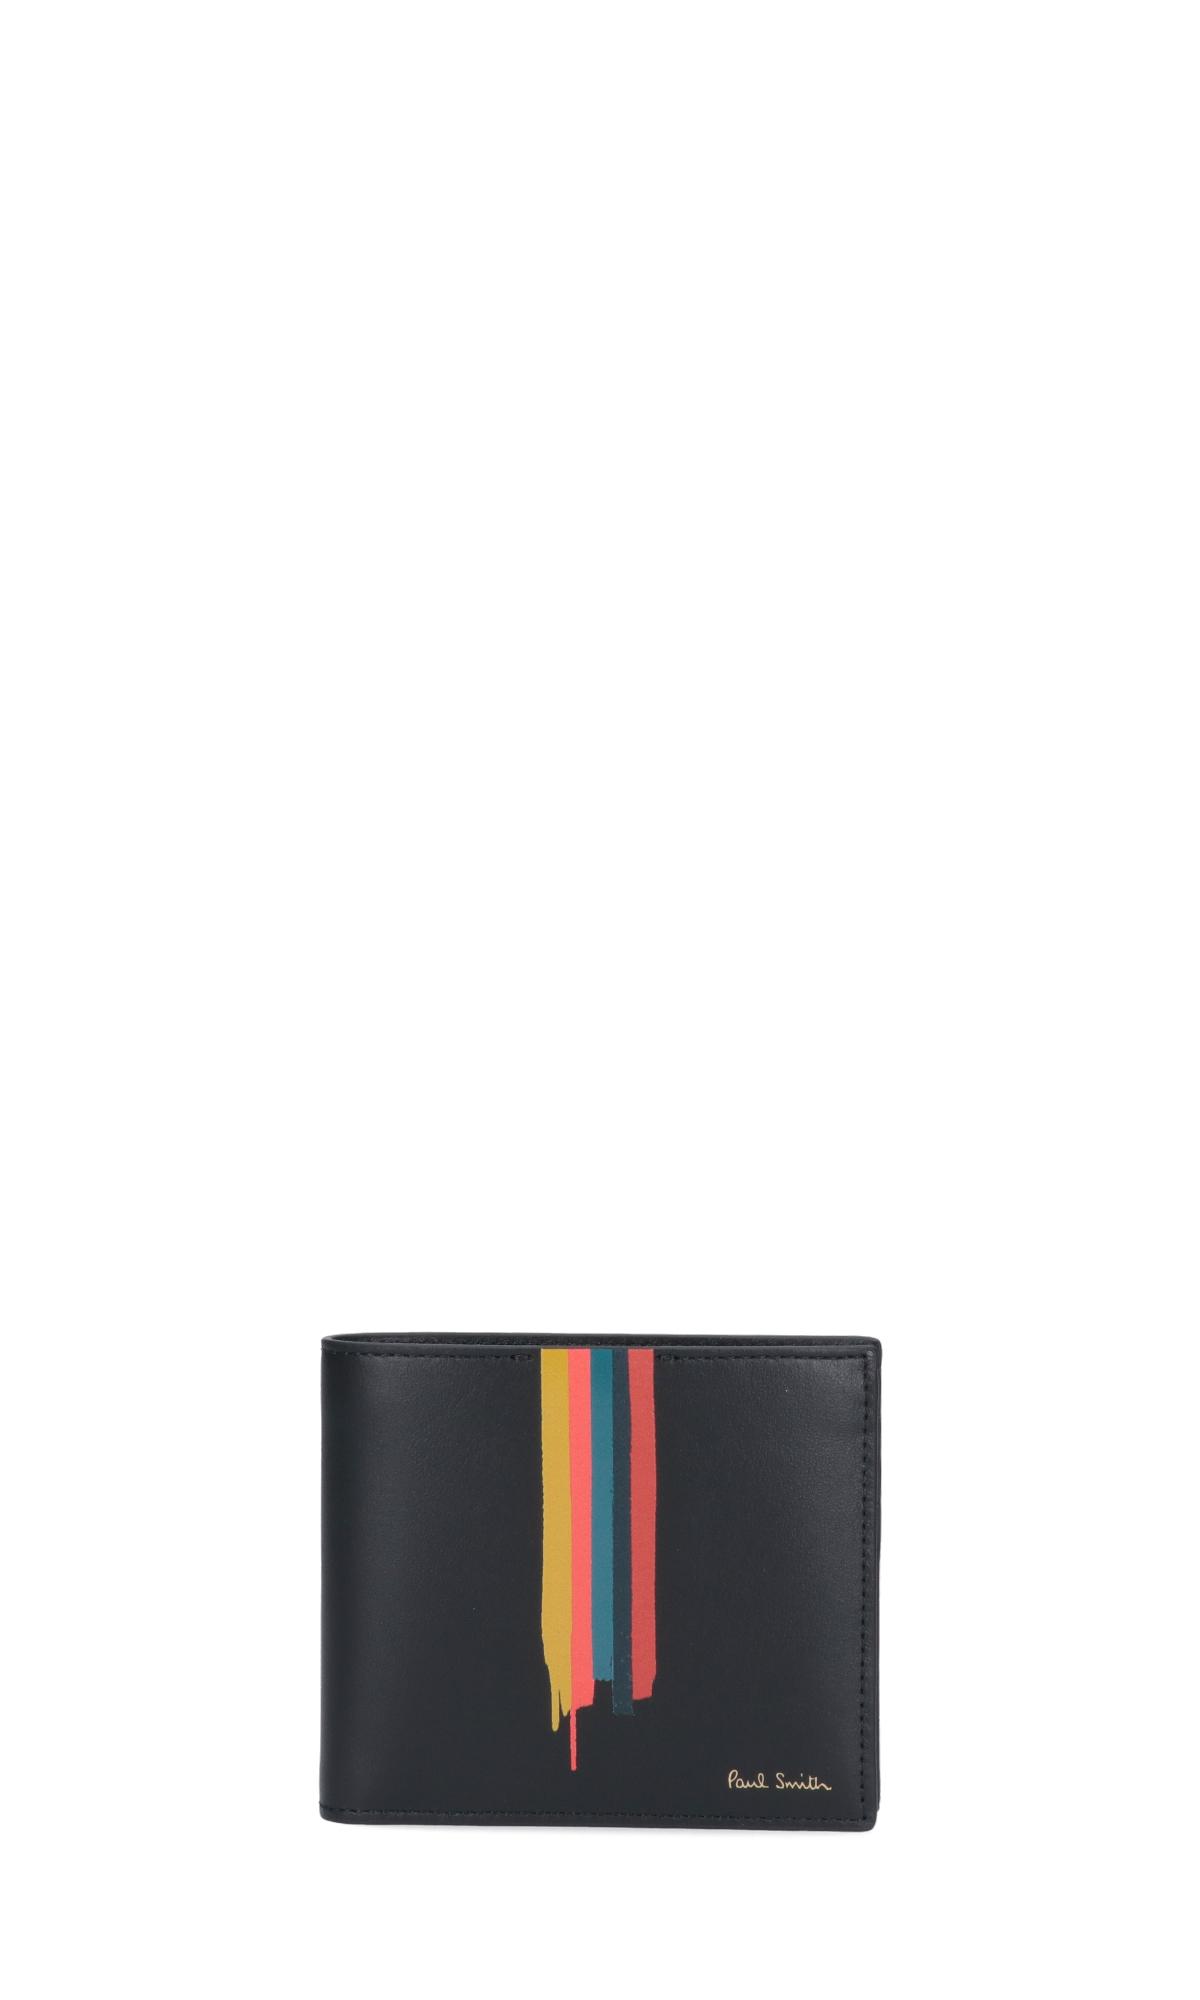 Paul Smith Leather 'painted Stripe' Wallet in Nero (Black) for Men - Save  5% | Lyst